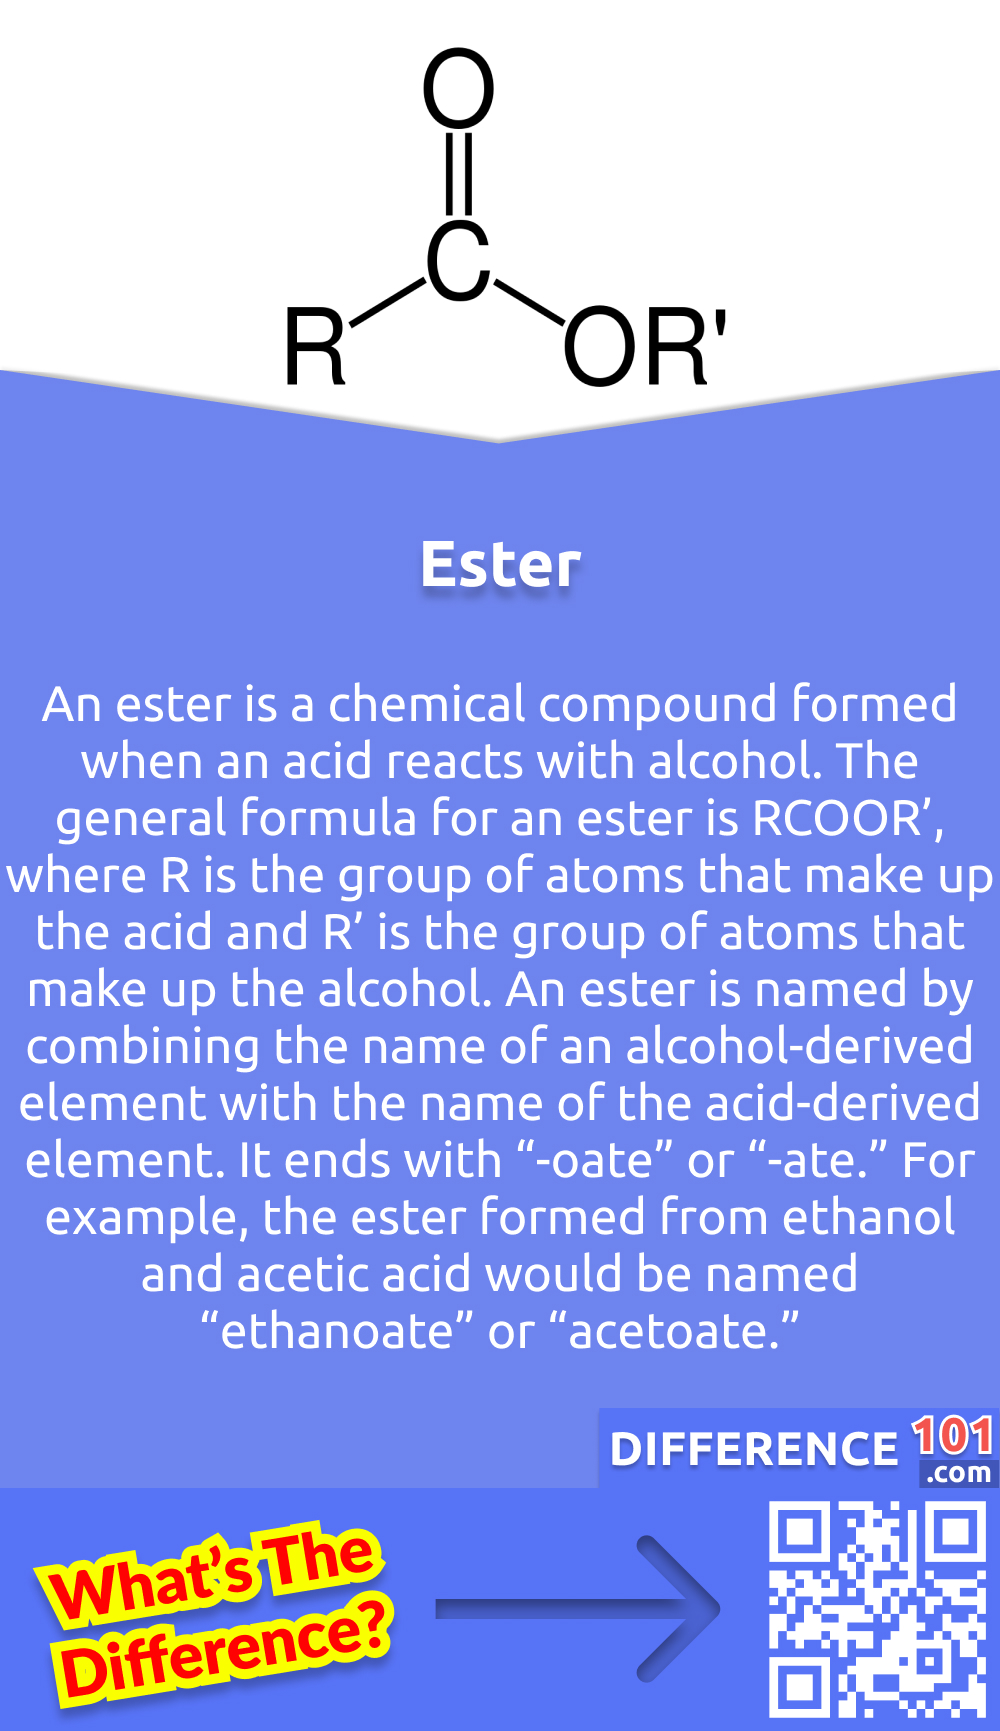 What Is Ester? An ester is a chemical compound formed when an acid reacts with alcohol. The general formula for an ester is RCOOR’, where R is the group of atoms that make up the acid and R’ is the group of atoms that make up the alcohol. An ester is named by combining the name of an alcohol-derived element with the name of the acid-derived element. It ends with “-oate” or “-ate.” For example, the ester formed from ethanol and acetic acid would be named “ethanoate” or “acetoate.”